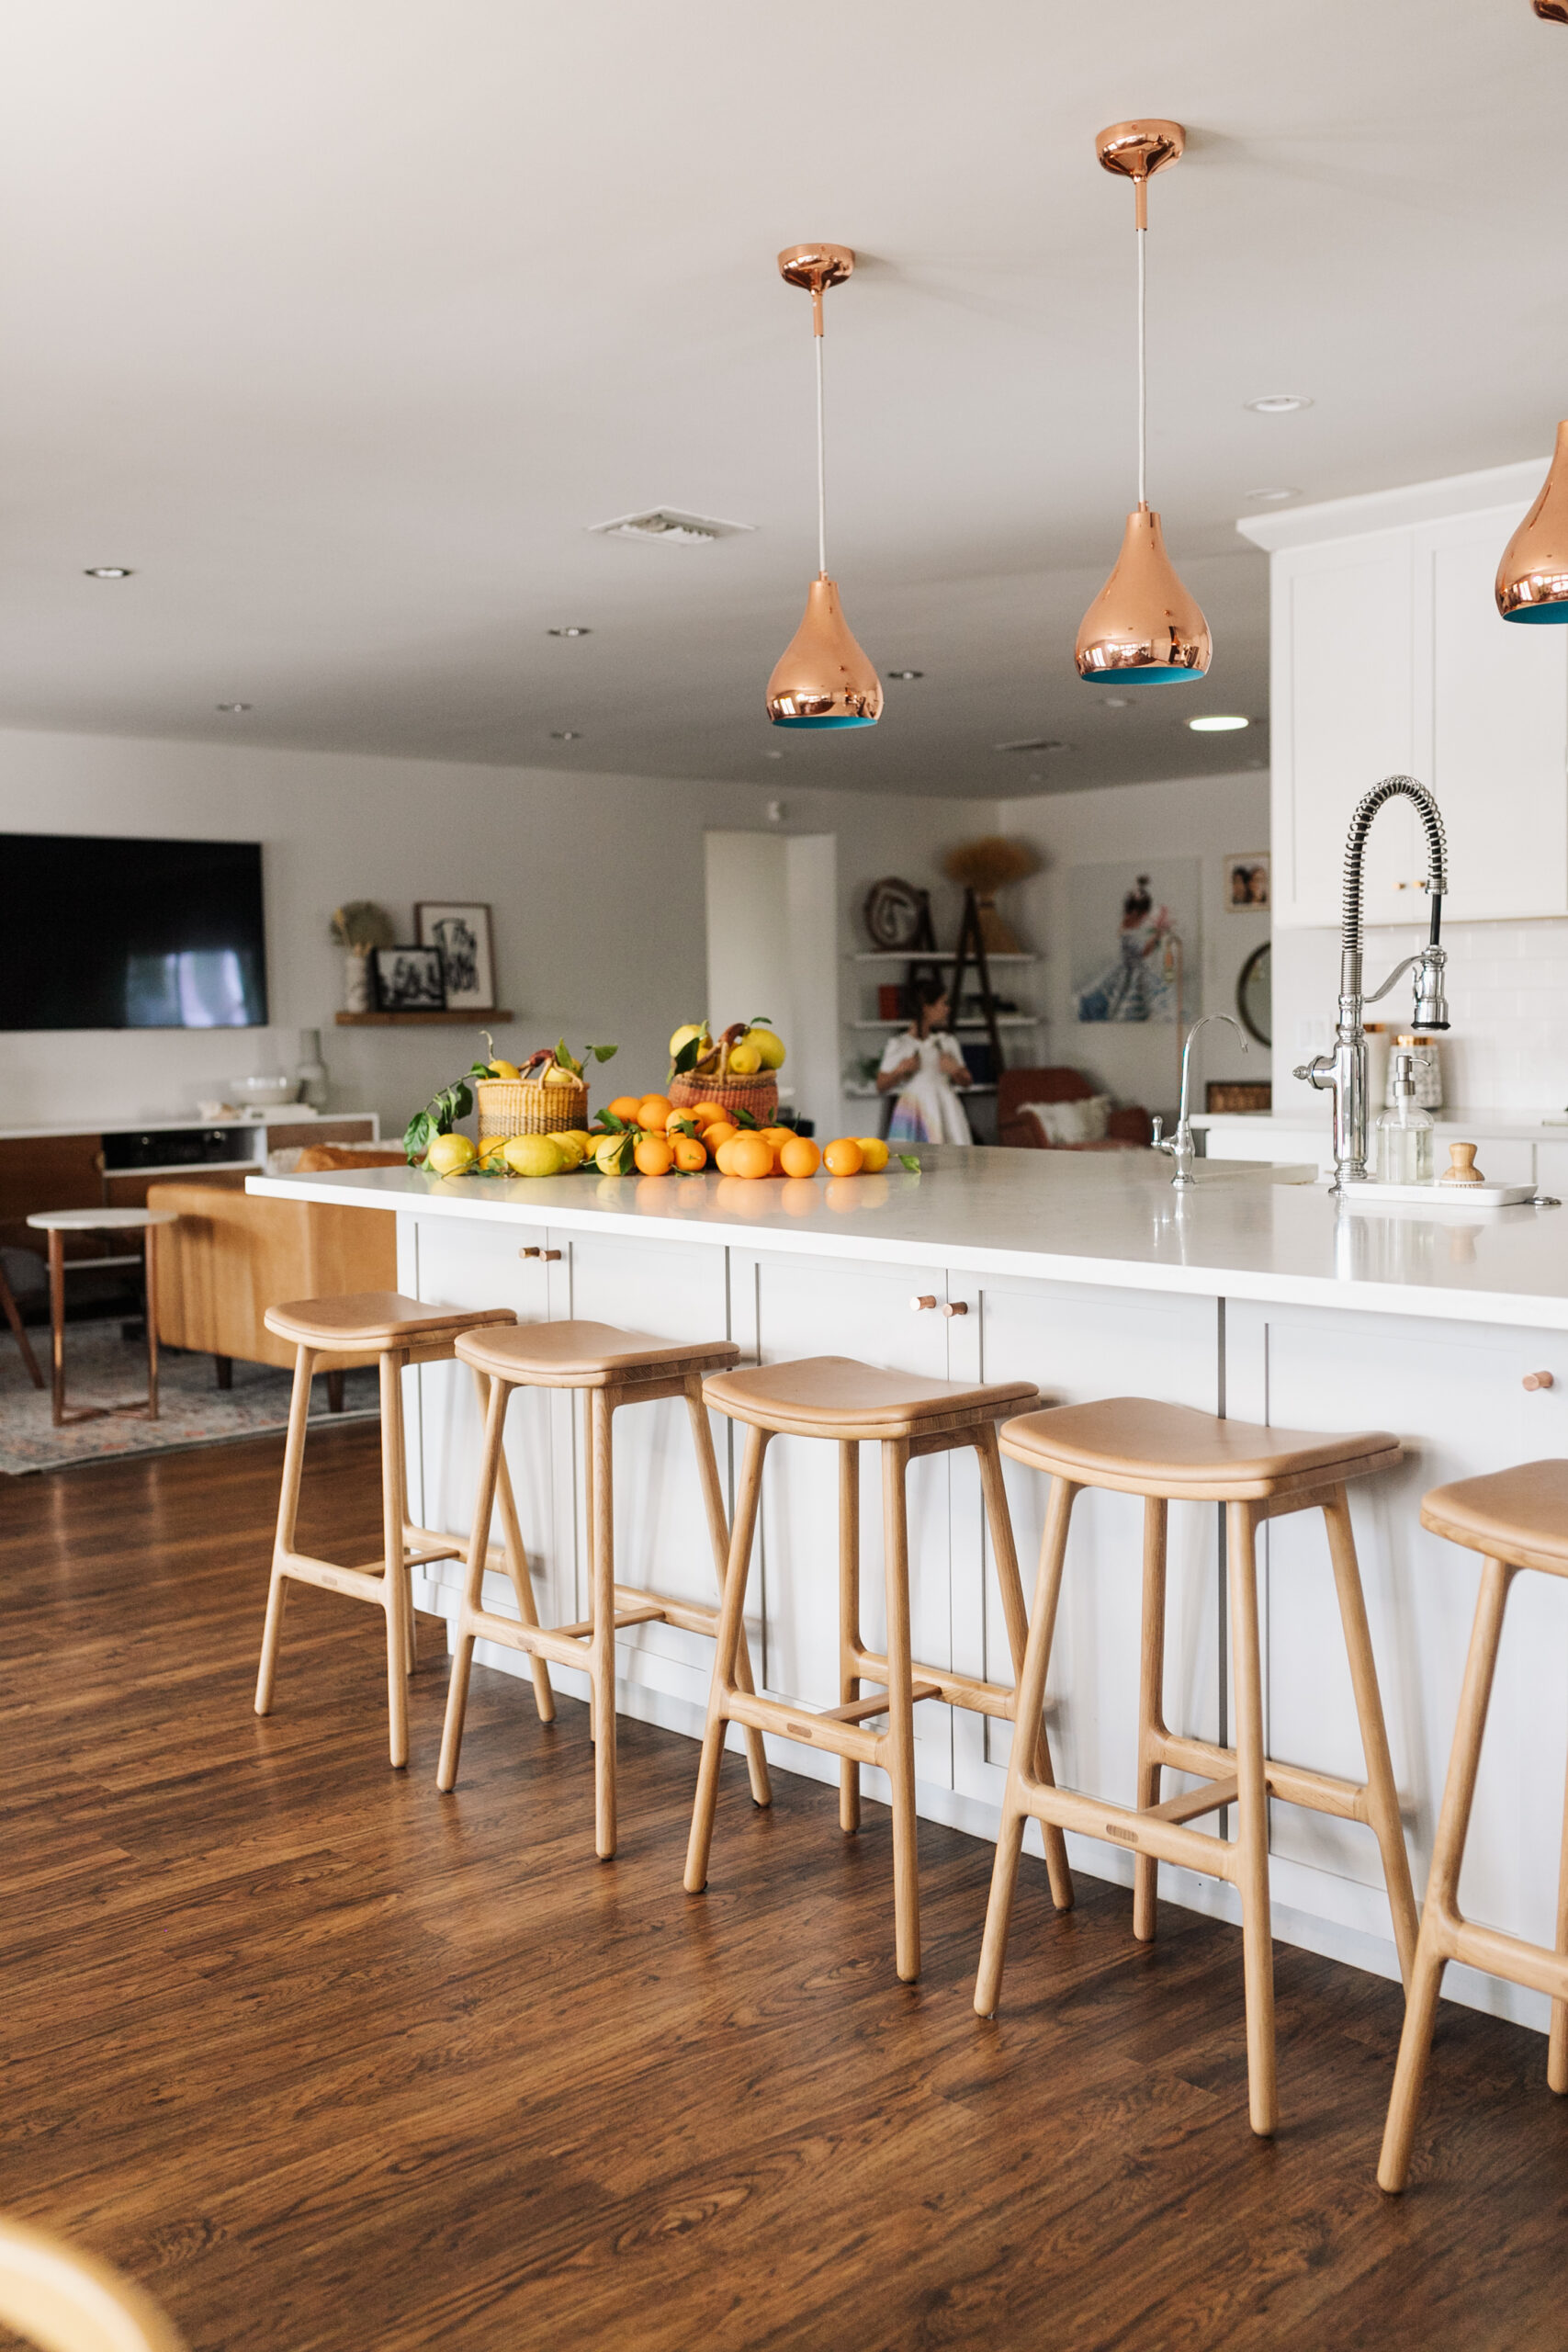 so happy with these modern, warm oak stools in our kitchen update #thelovedesignedlife #theldlhome #newkitchenstools #modernkitchen #mcm #danish